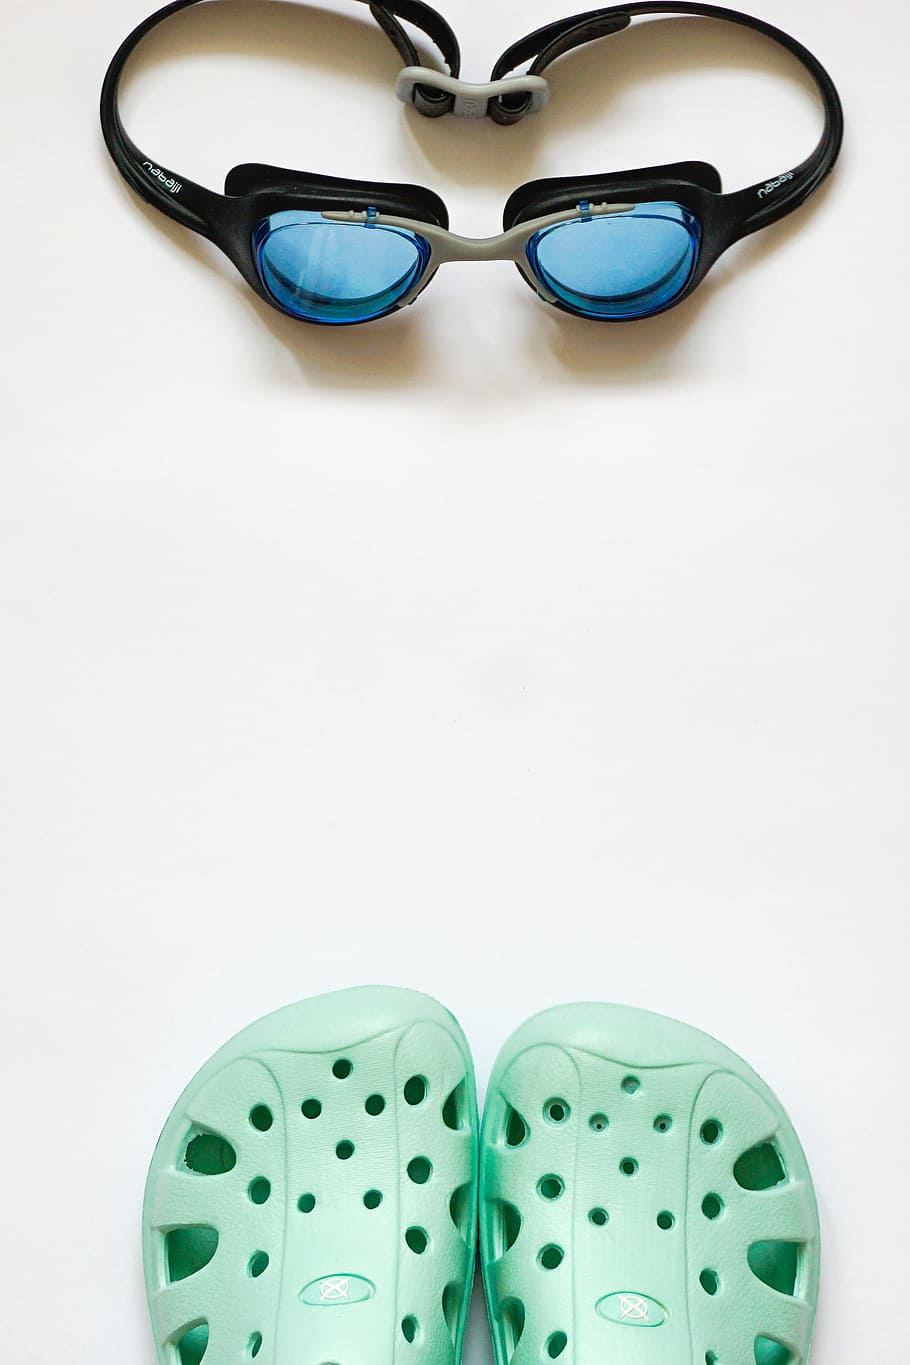 Accessories, Pool, Swimming Goggles, flip, swimming, fashion, sunglasses, personal Accessory, eyeglasses, clothing